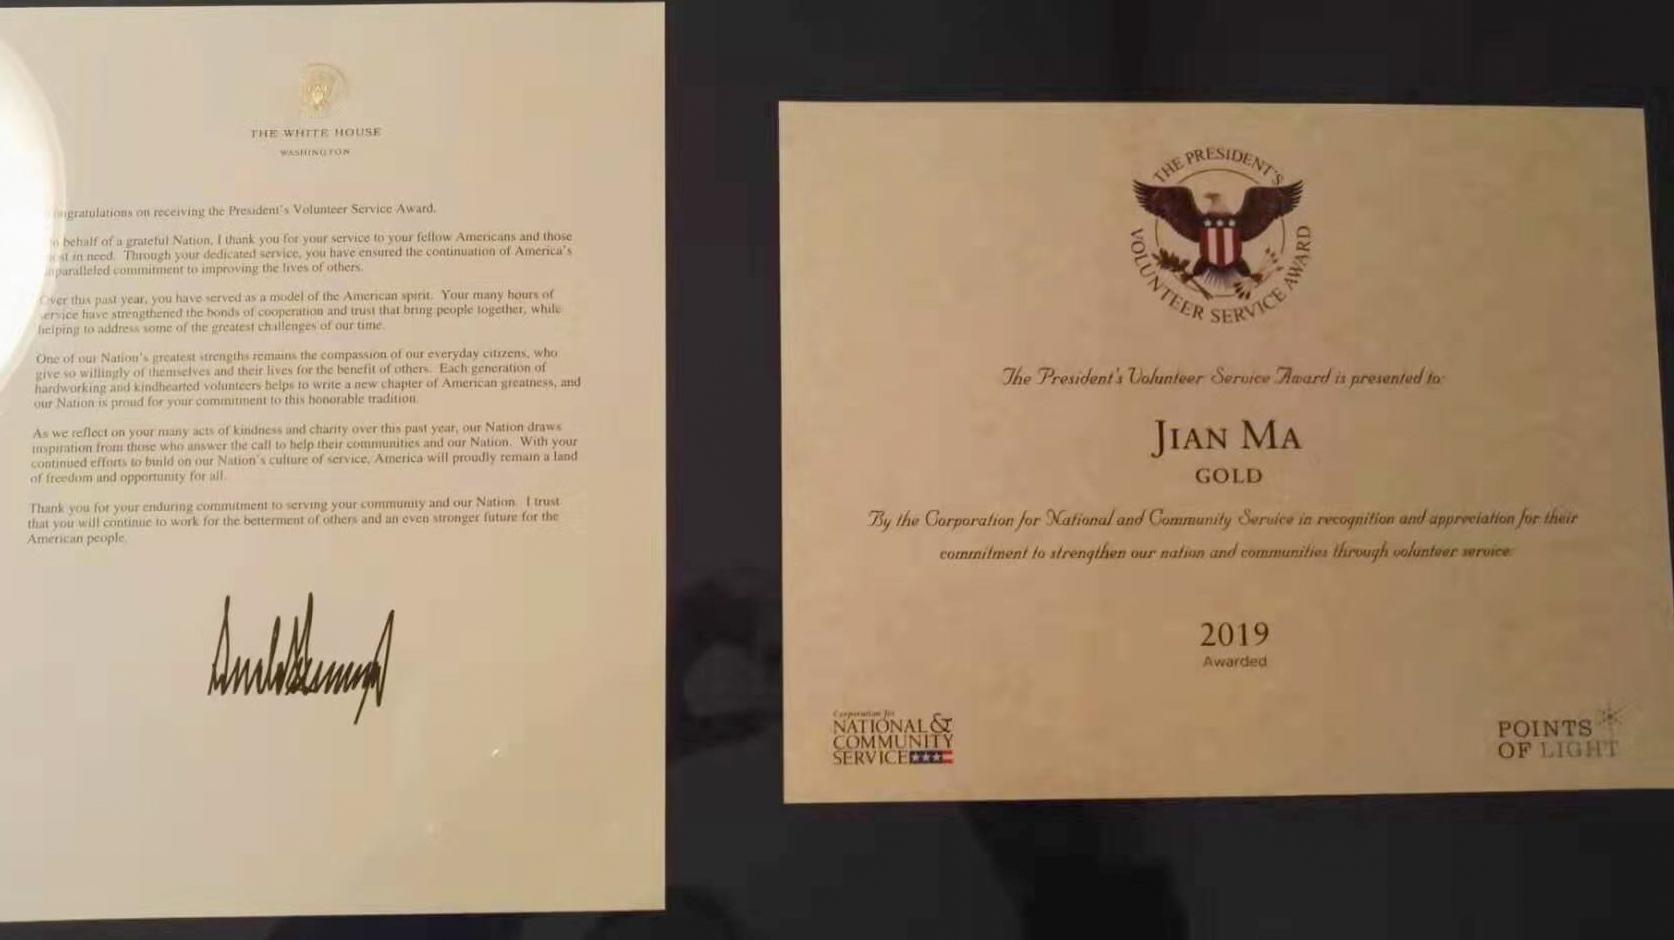 Letter and certificate for the President's Volunteer Service Award